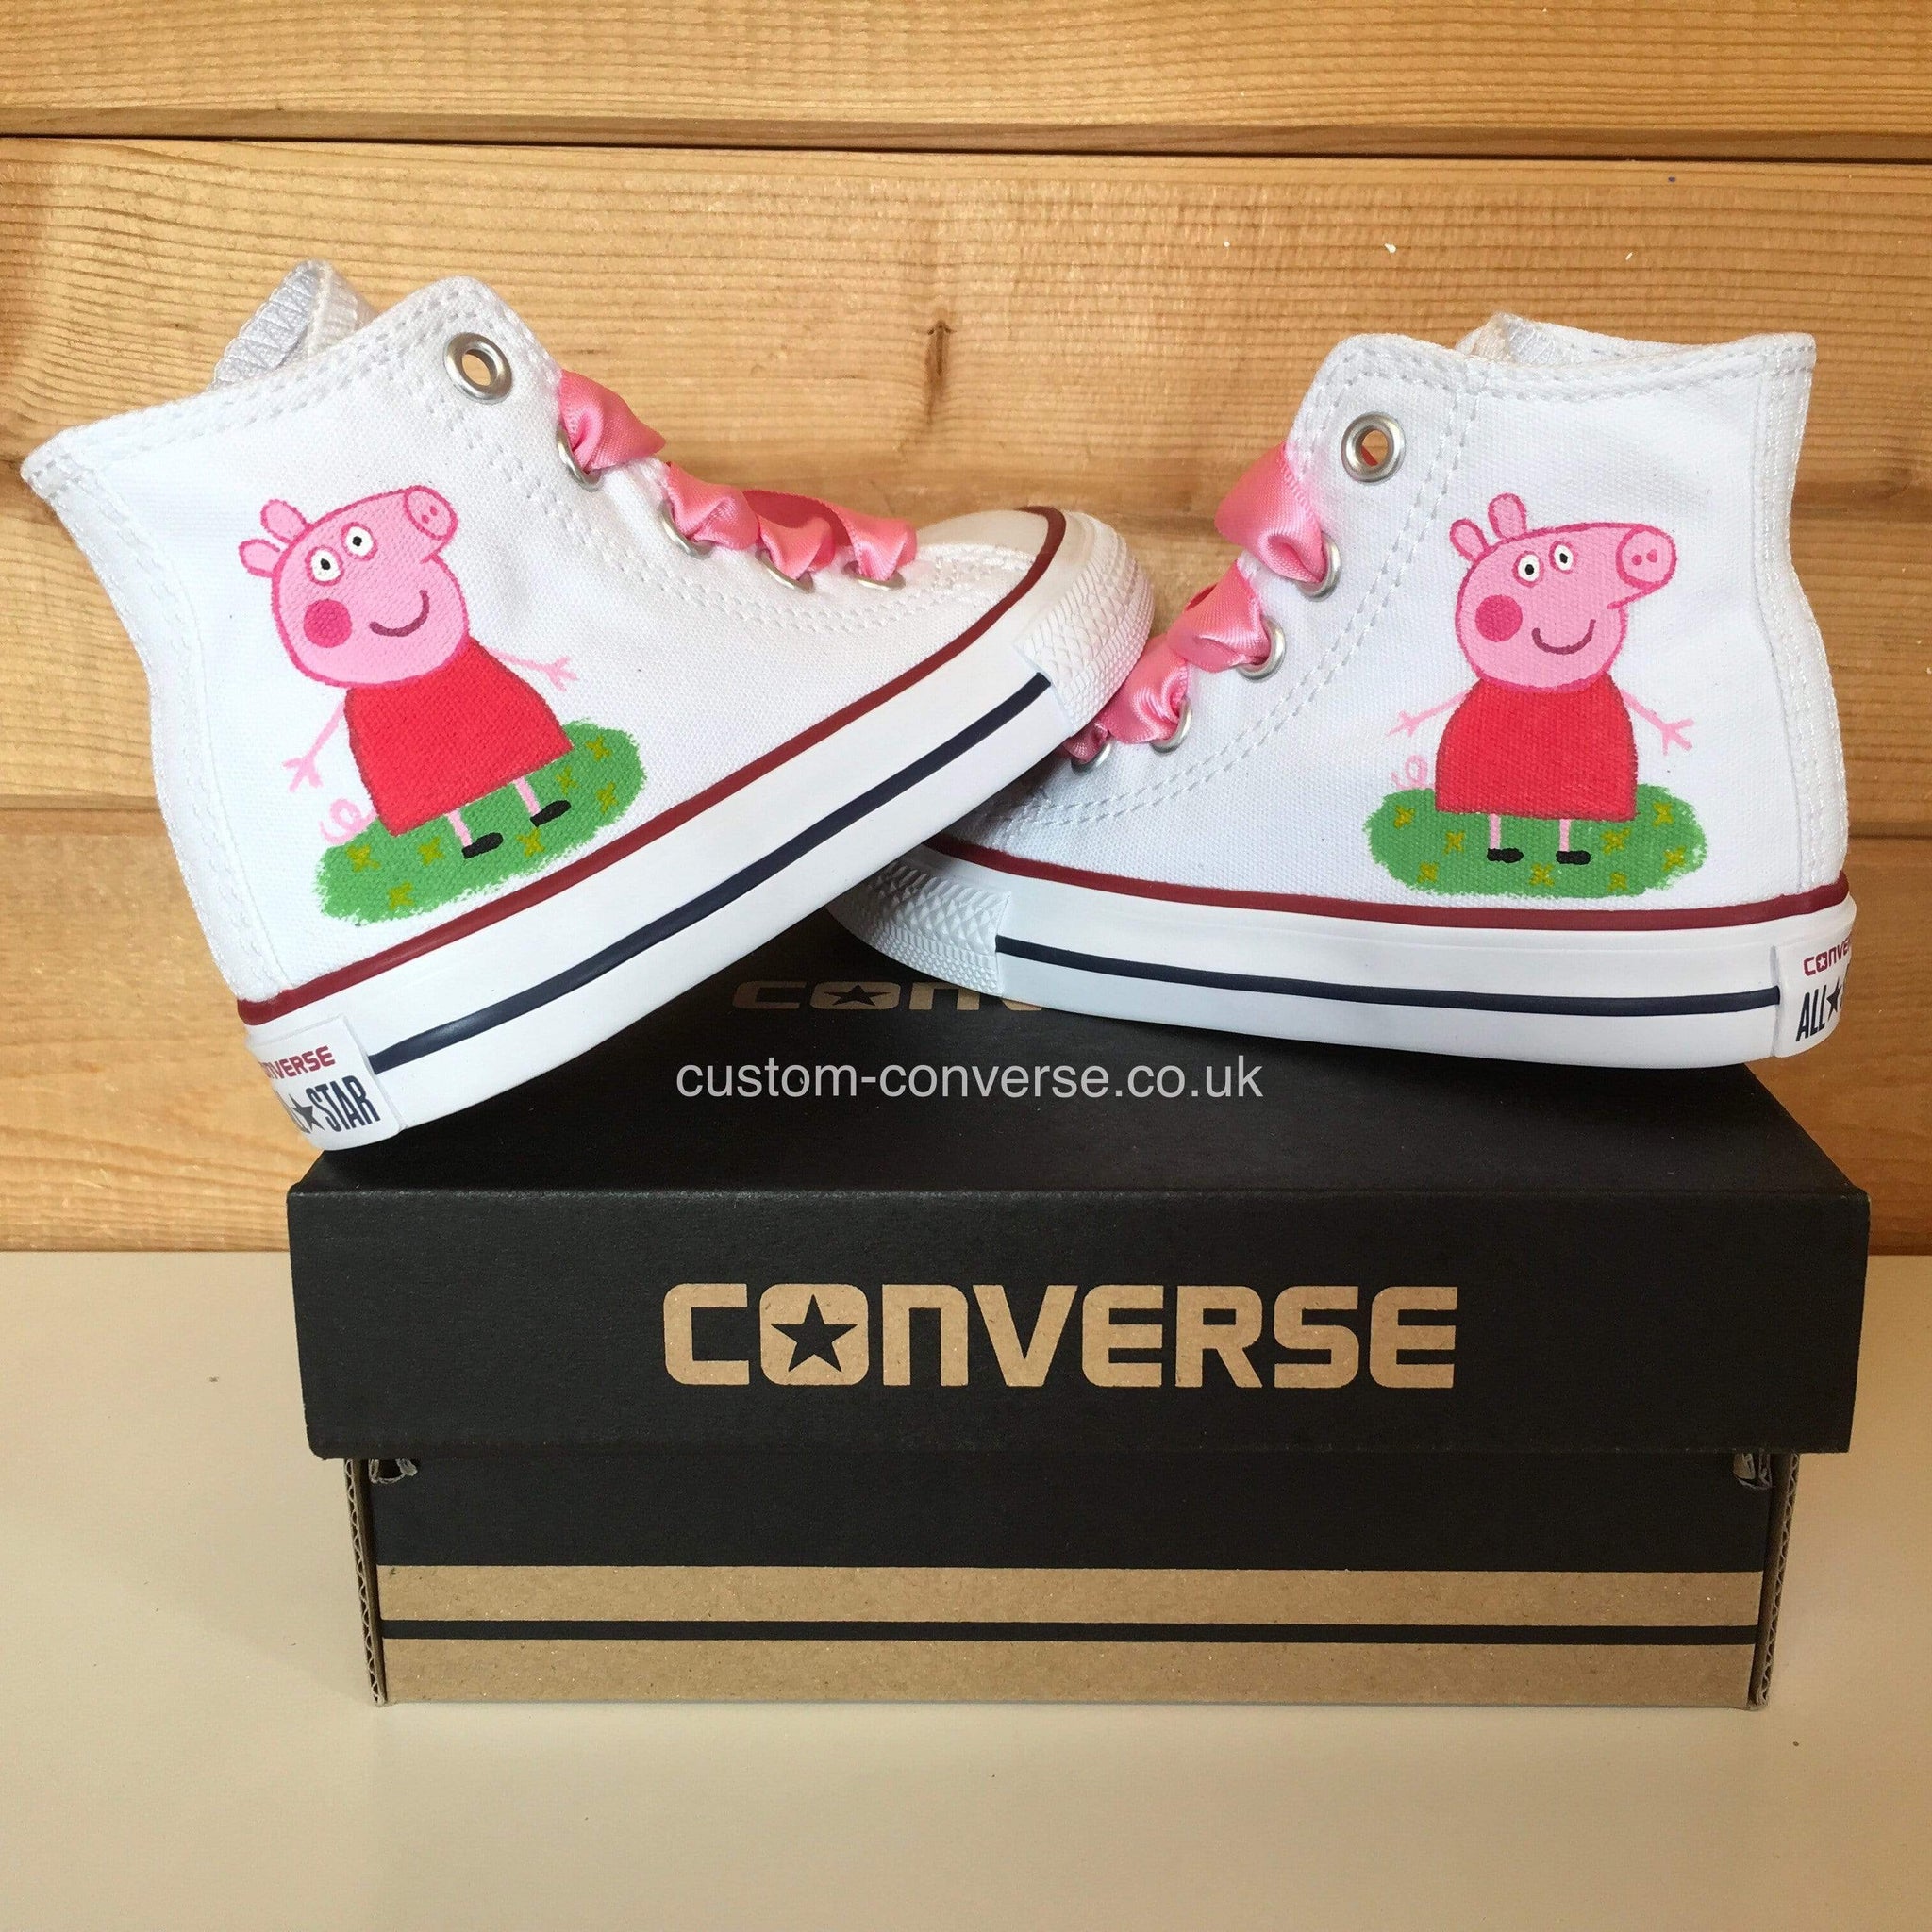 pig sneakers for adults